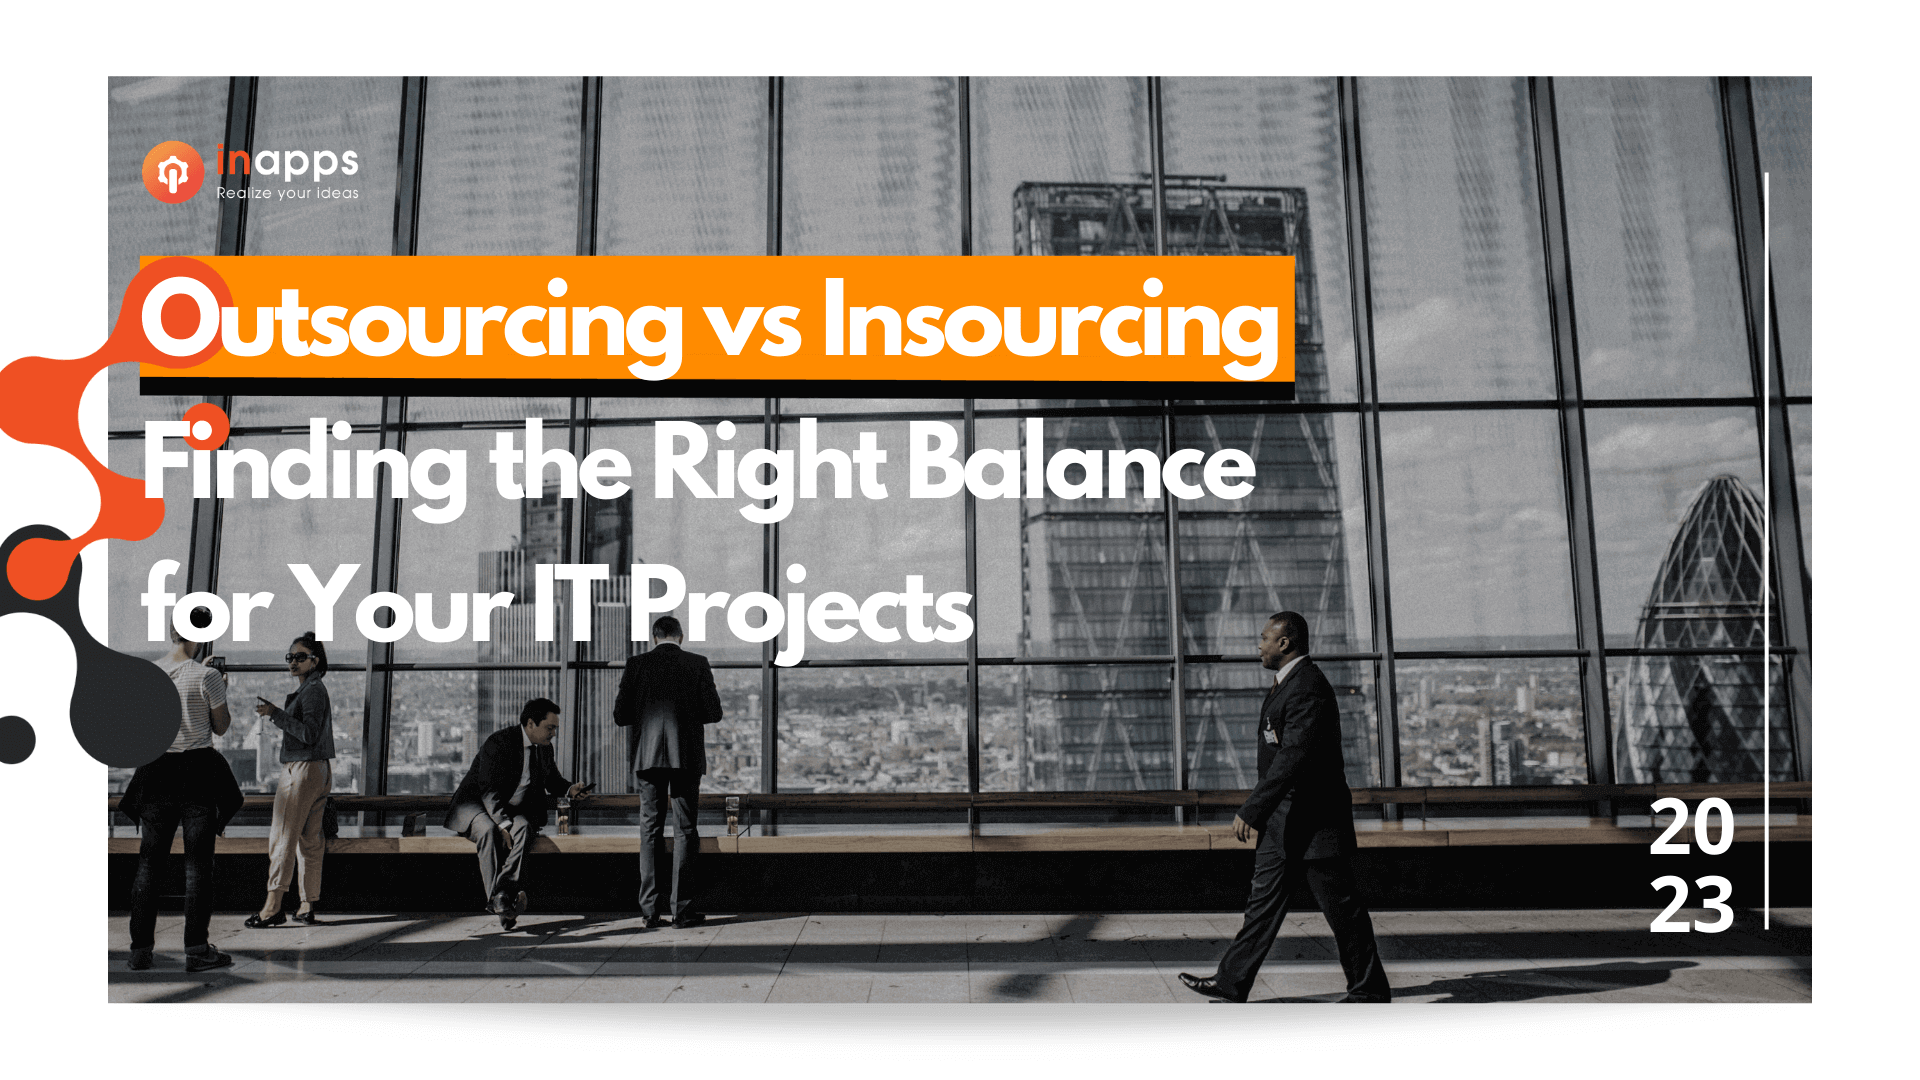 insourcing vs outsourcing - InApps